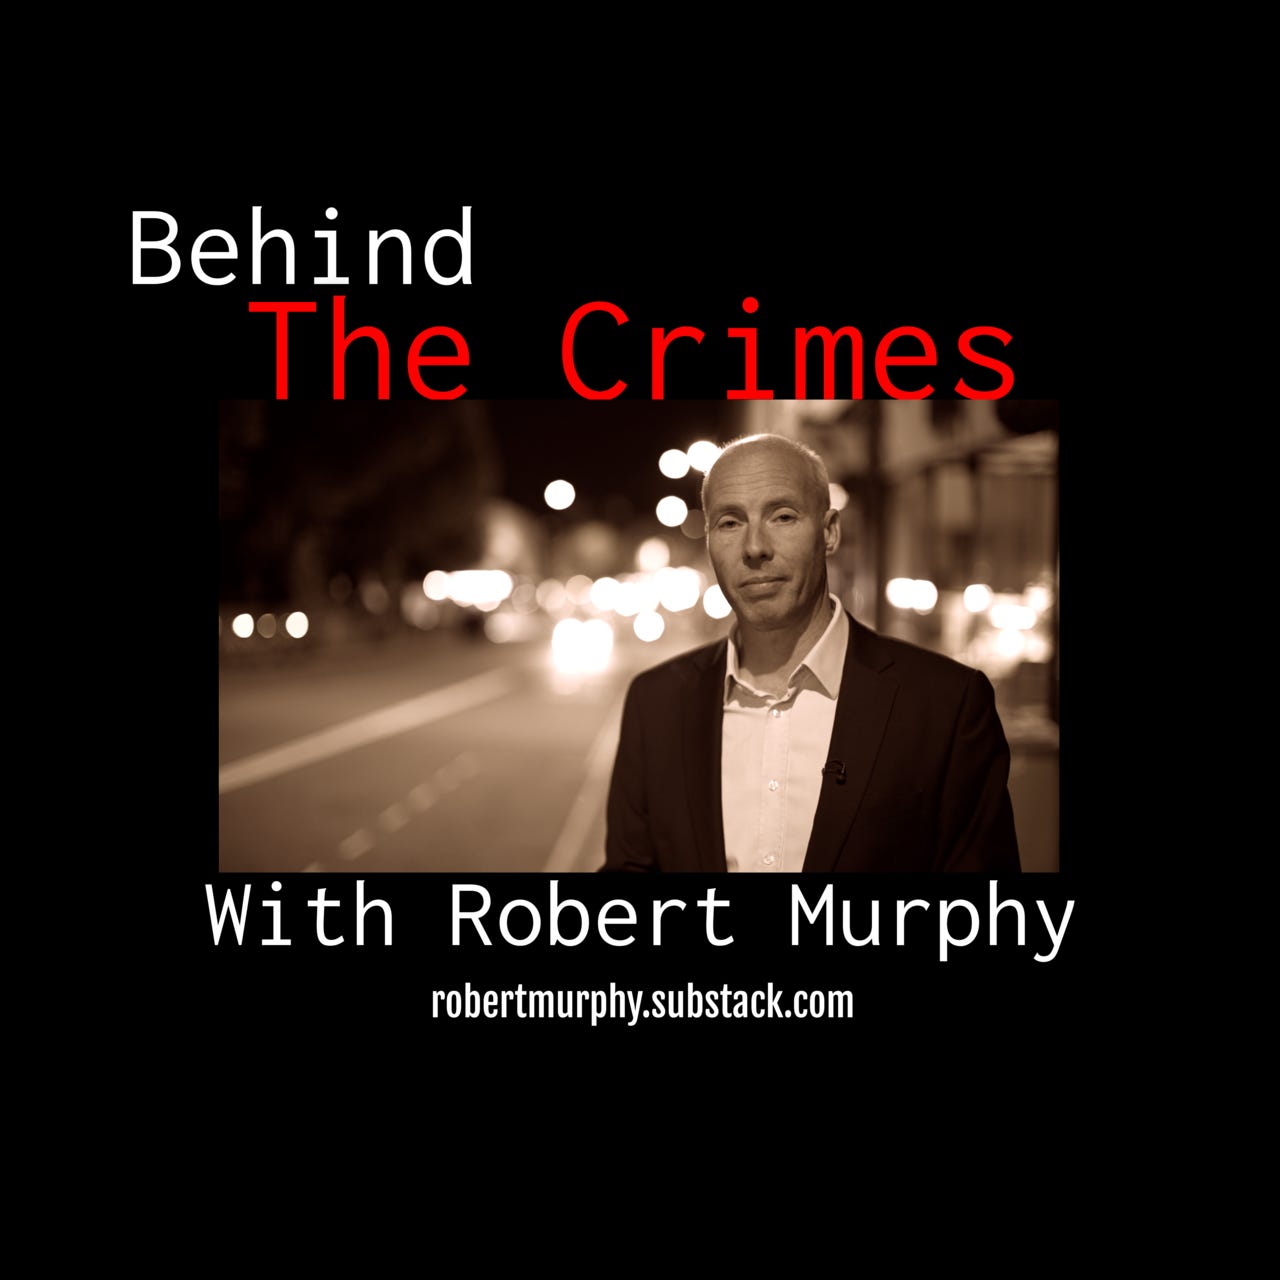 Behind the Crimes